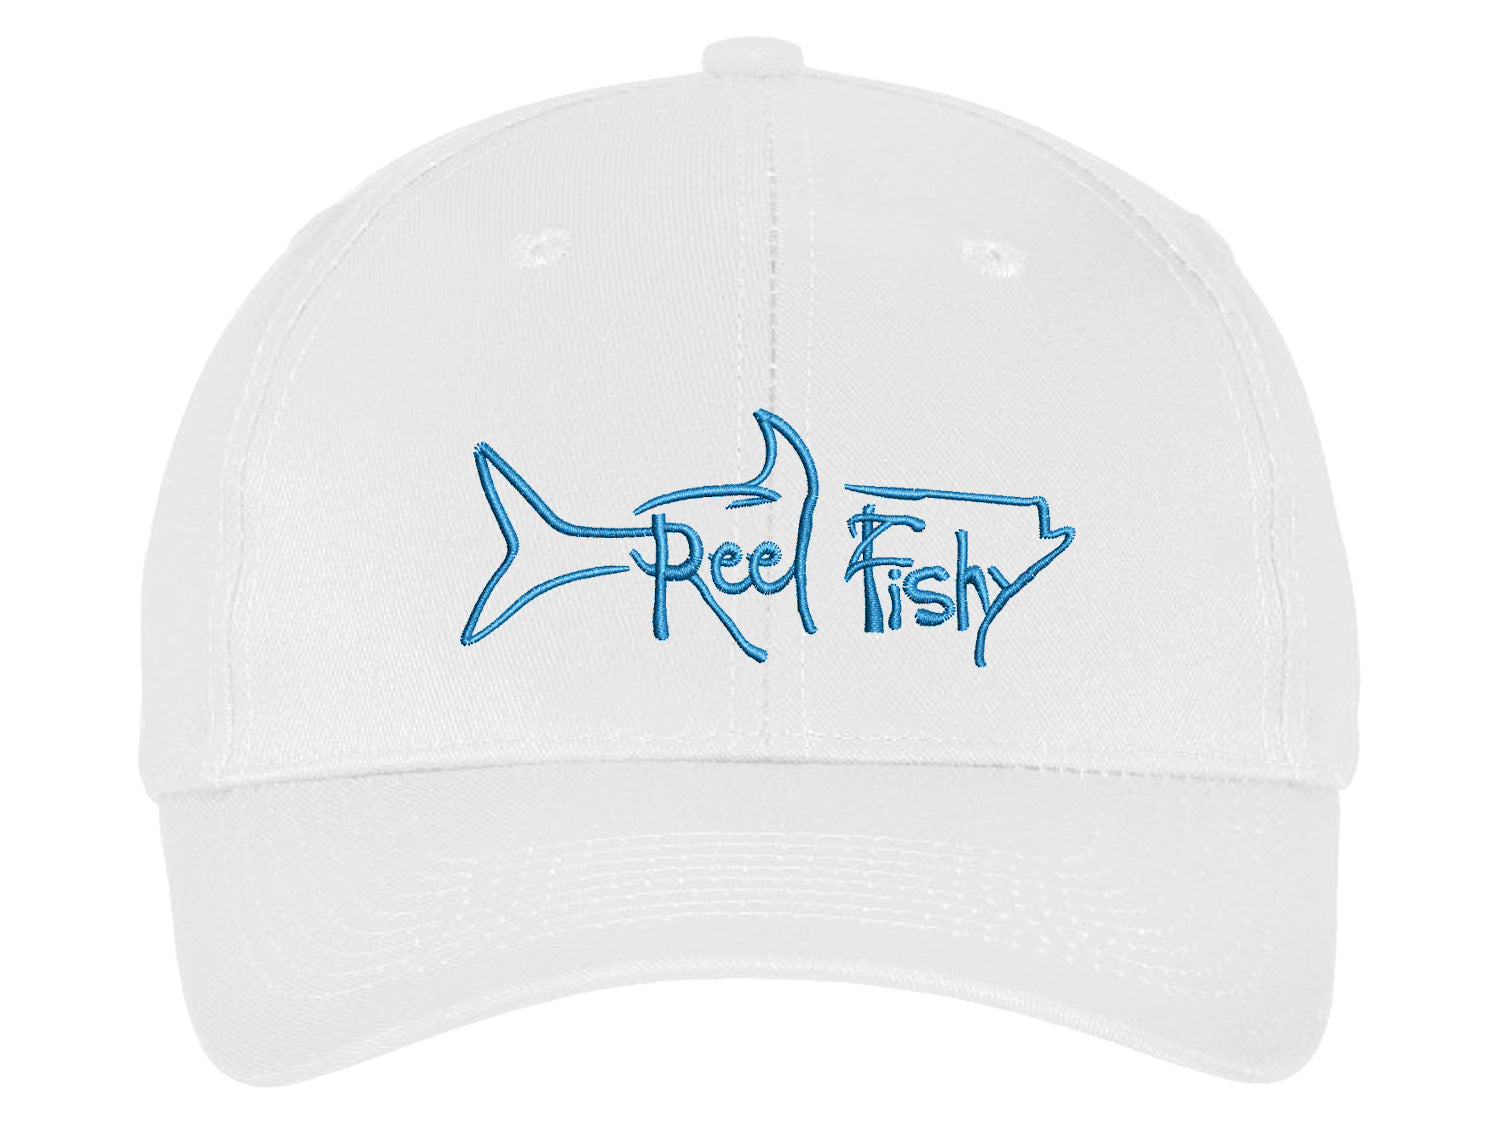 White Unstructured Dad Hat with Turquoise Reel Fishy Tarpon Logo